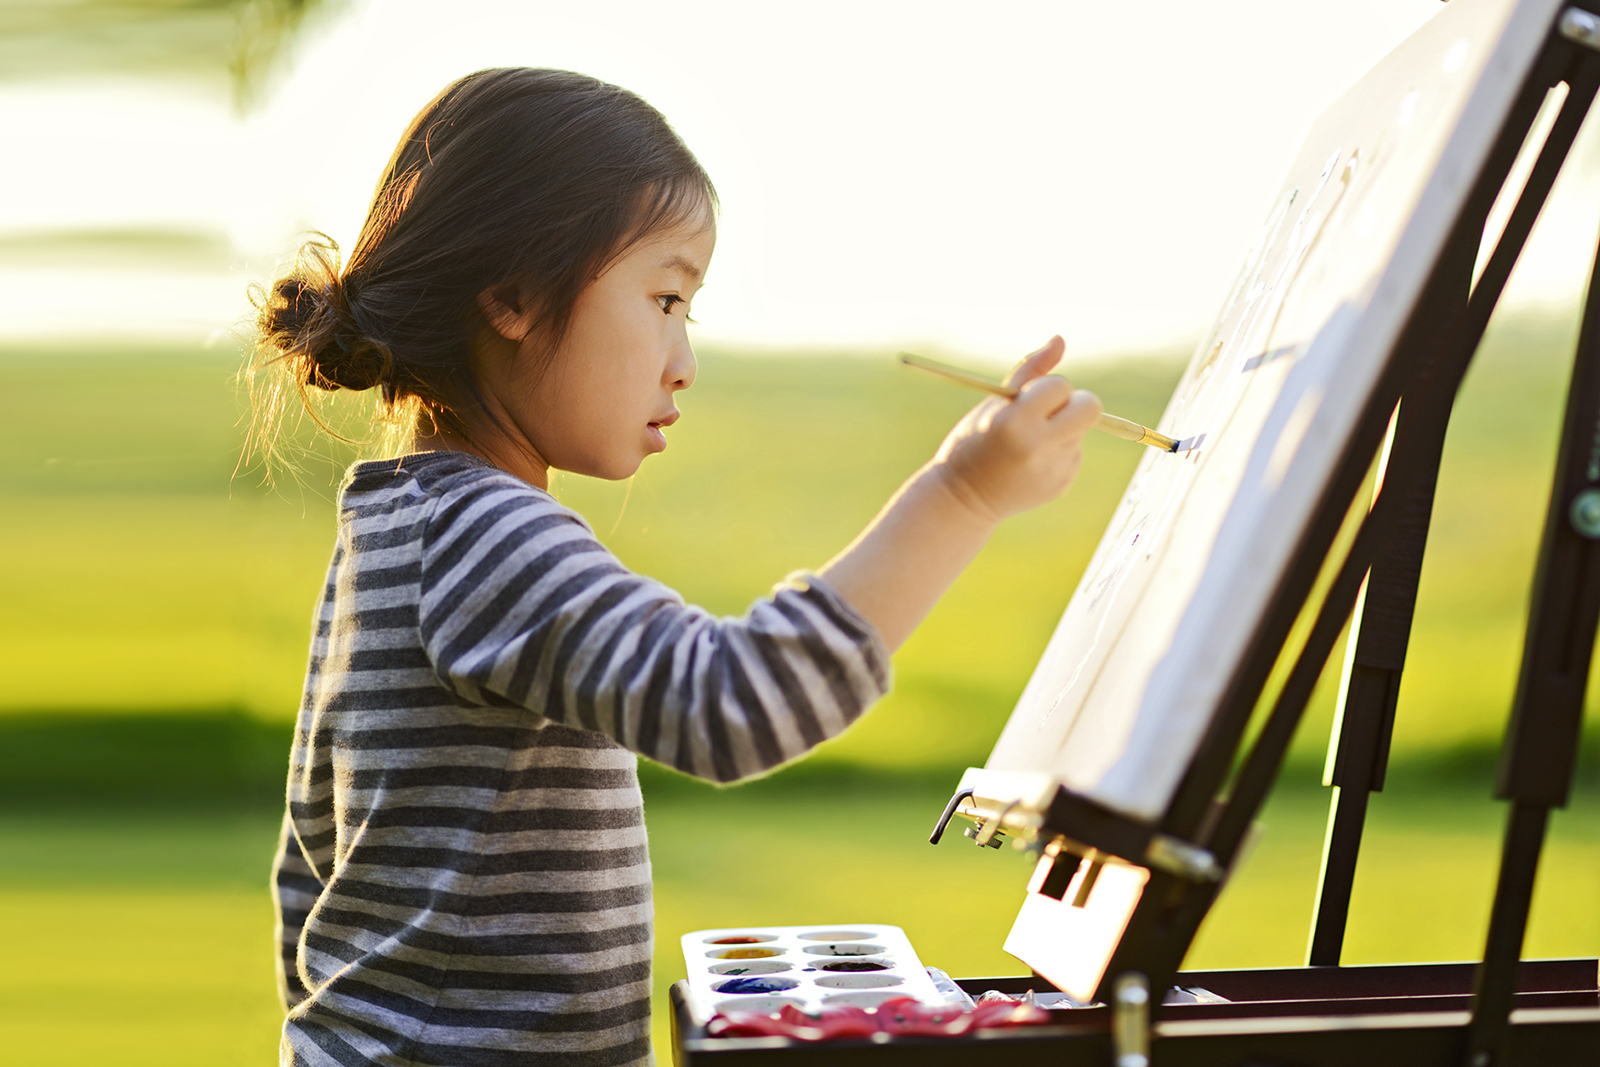 Are You a General Knowledge Genius? The young artist